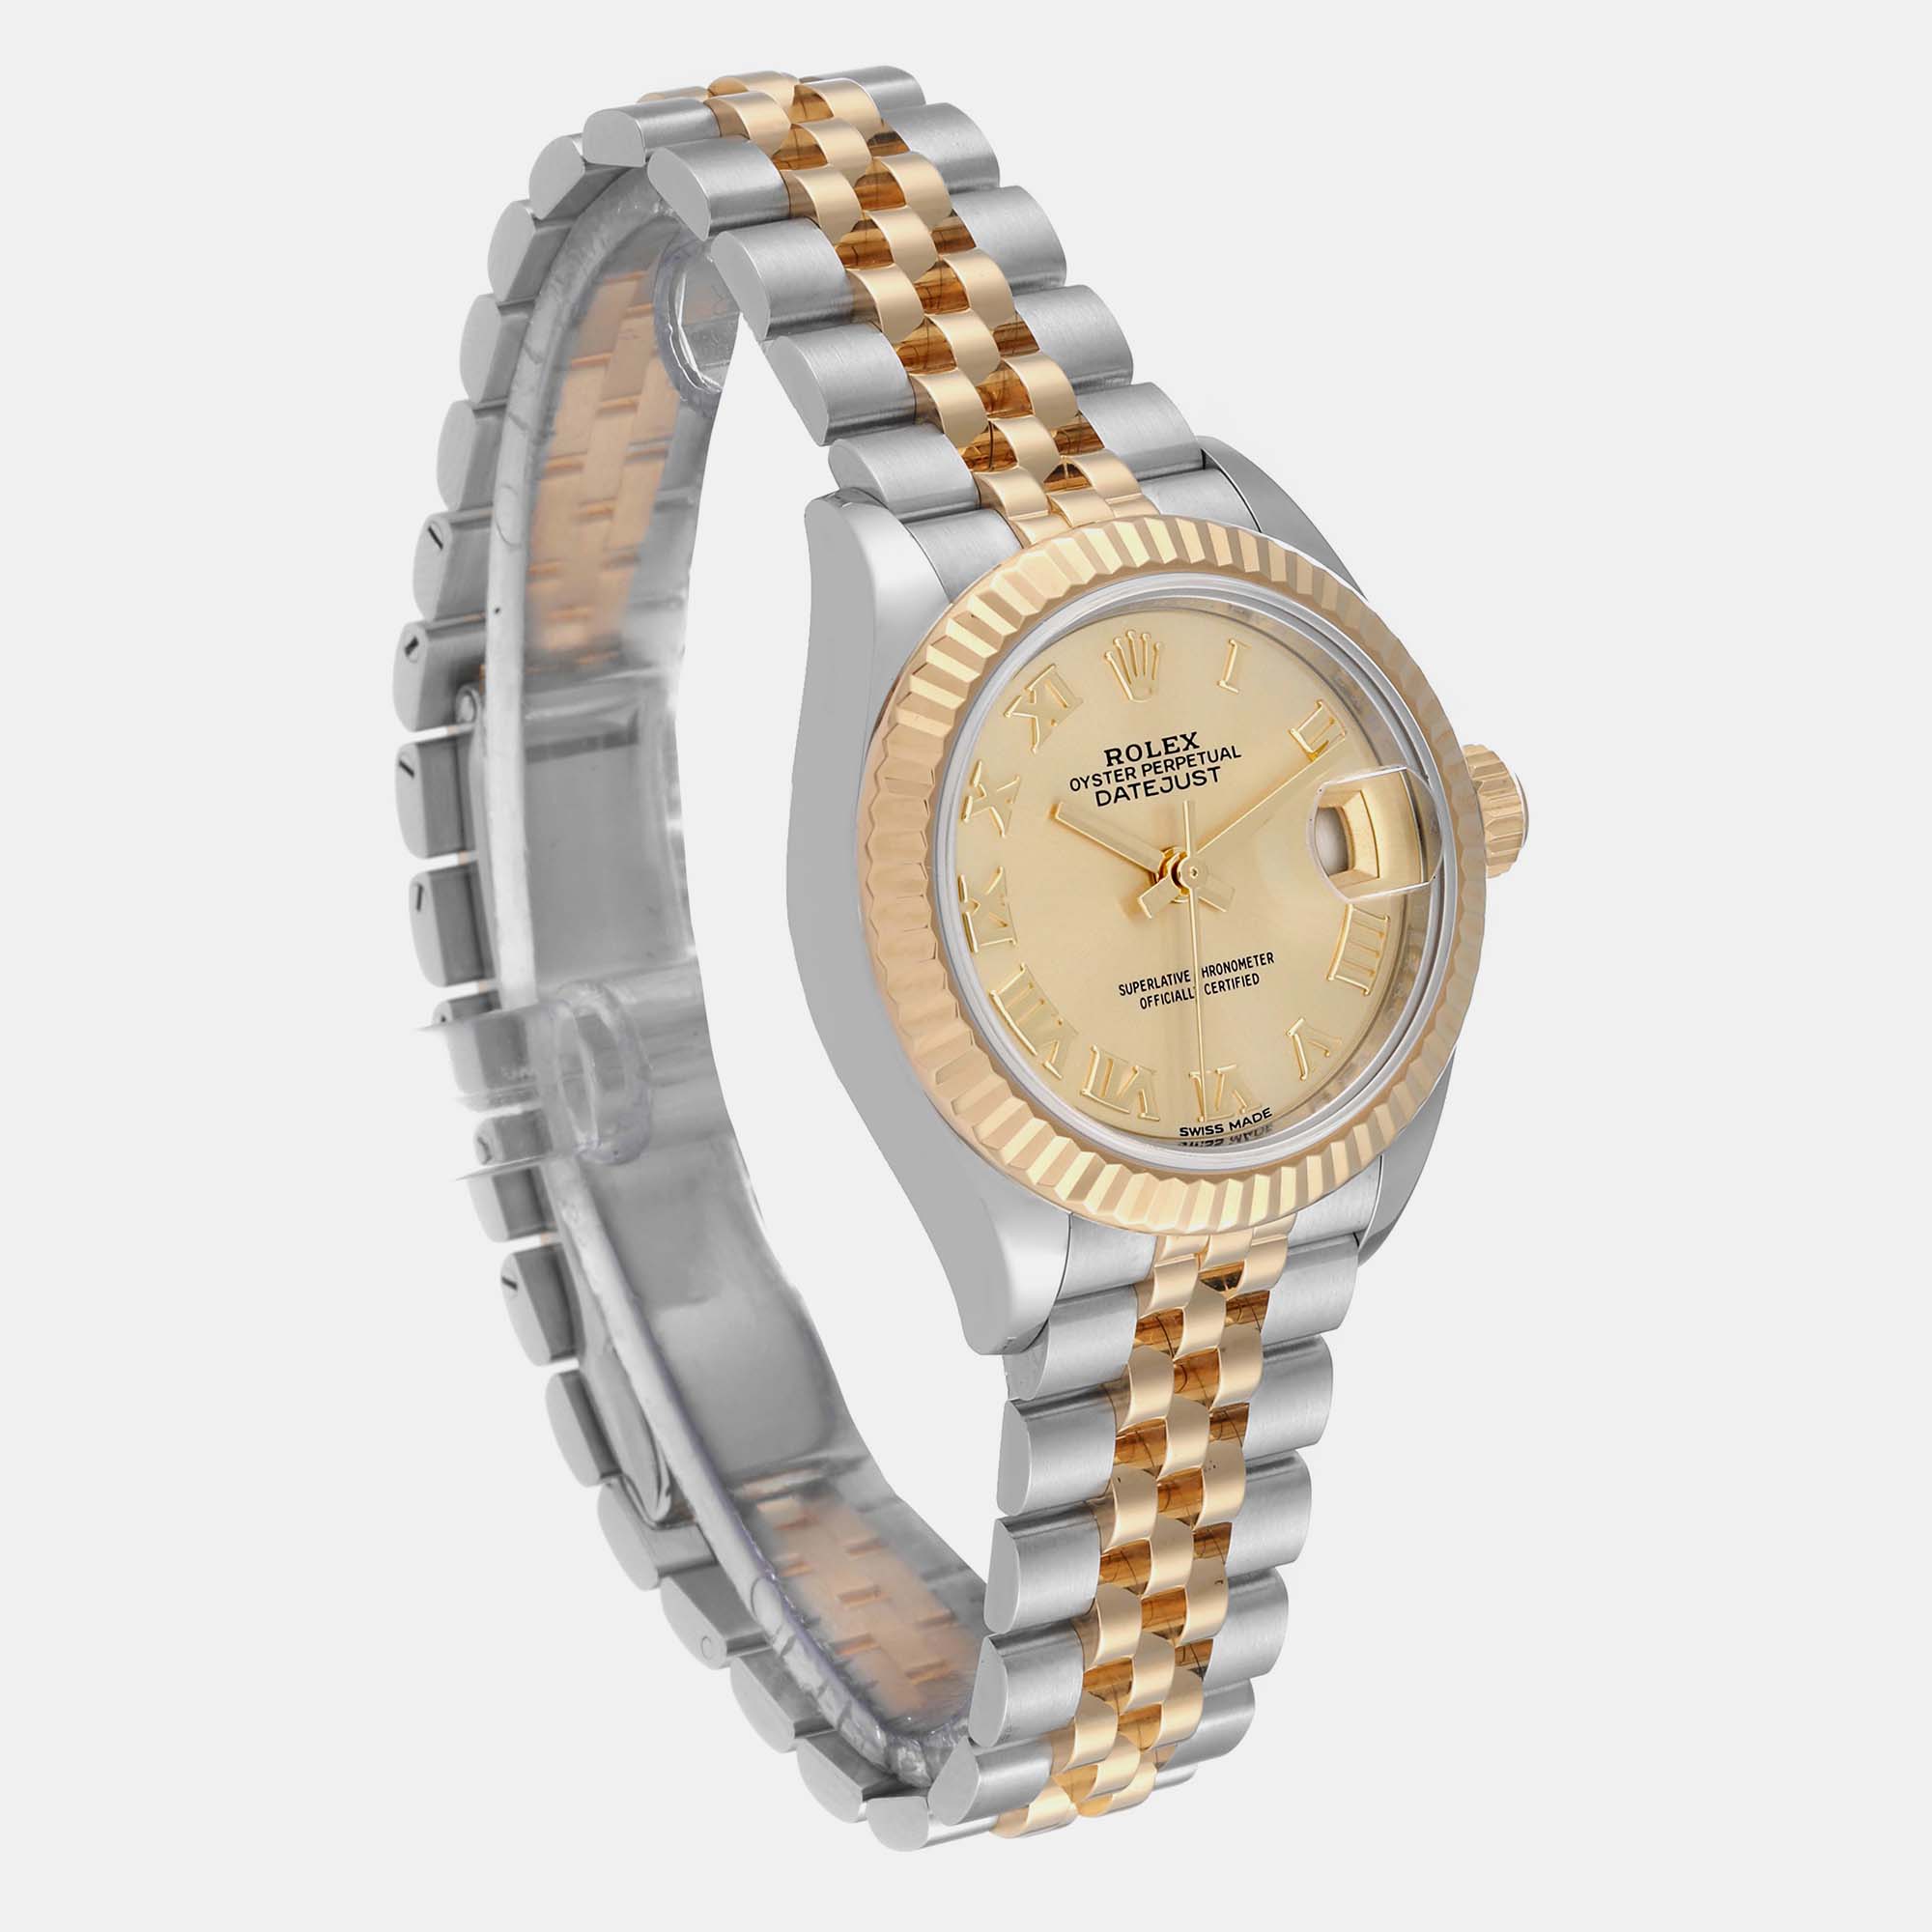 Rolex Datejust 28 Steel Yellow Gold Champagne Dial Ladies Watch 279173